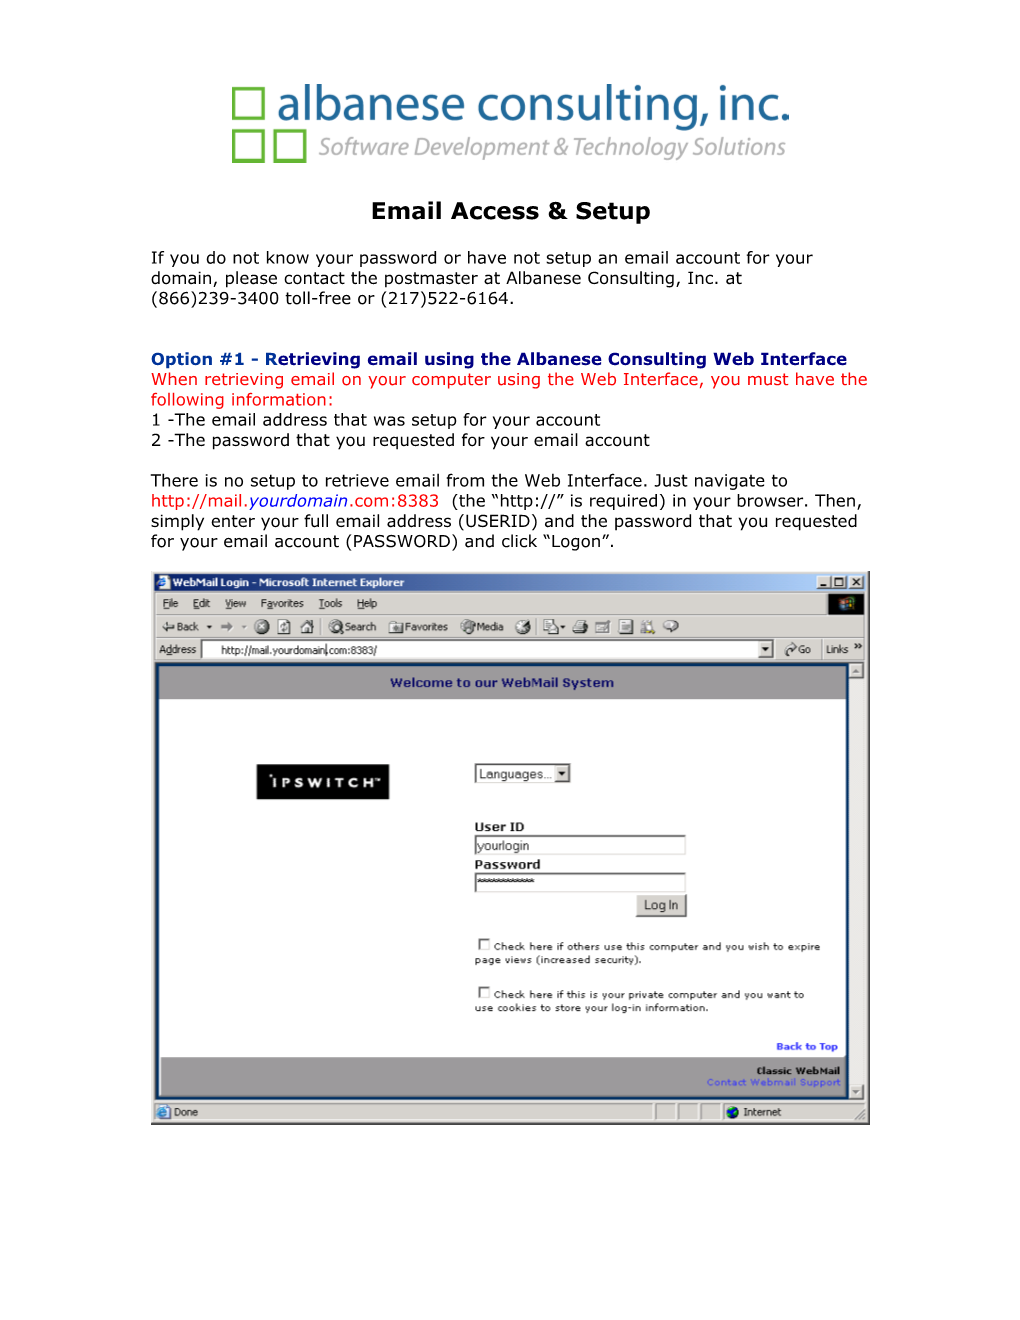 Option #1 - Retrieving Email Using the Albanese Consulting Web Interface